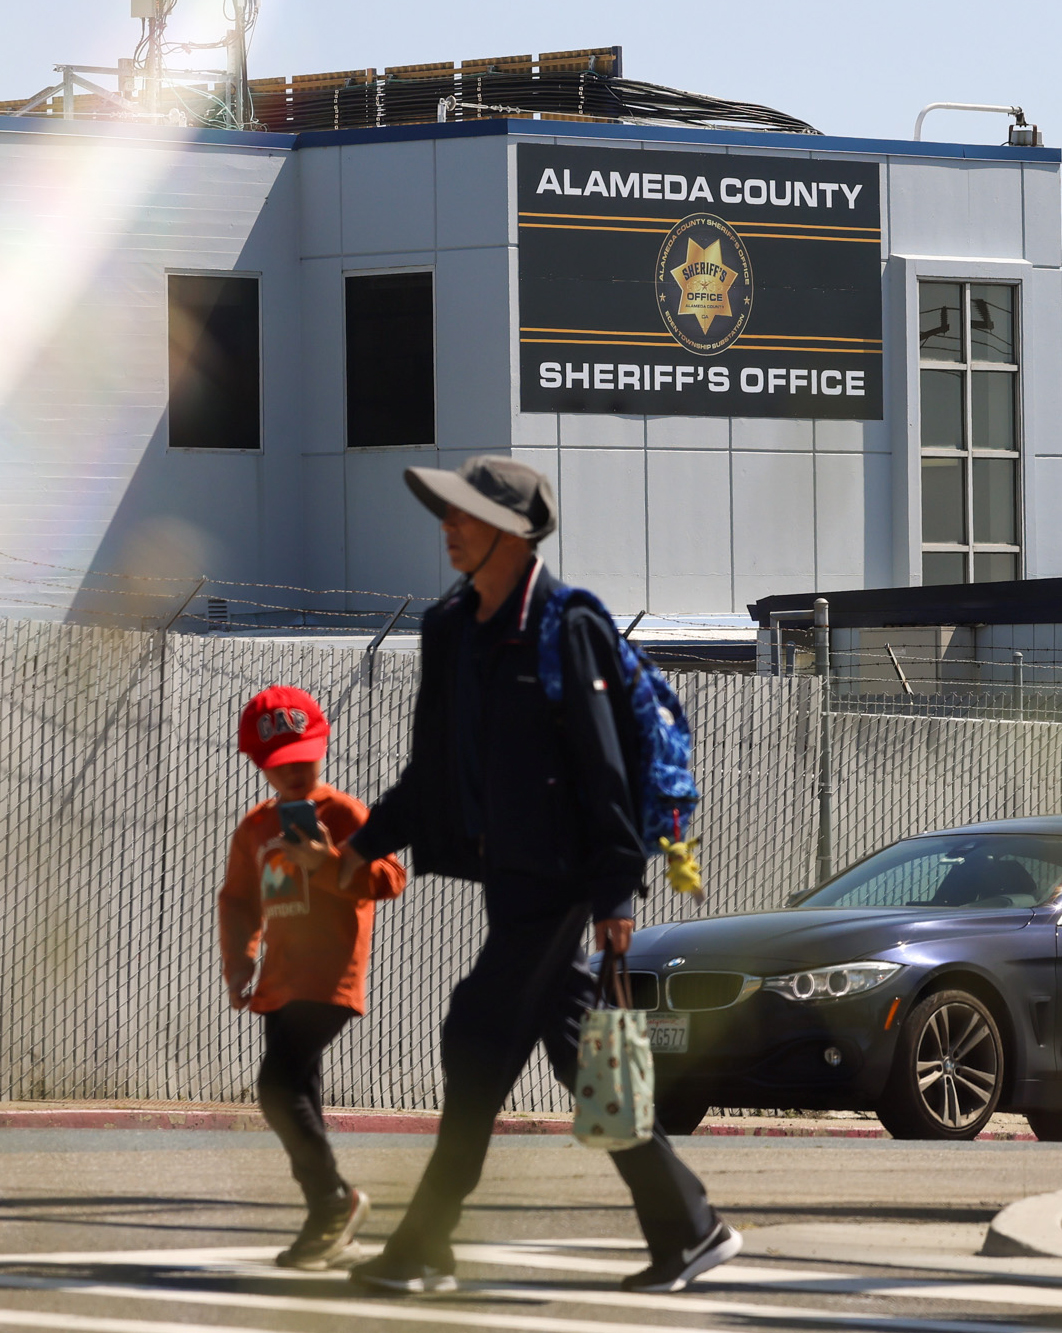 An adult and child walk by a building labeled &quot;ALAMEDA COUNTY SHERIFF'S OFFICE&quot; with a car passing in the background.